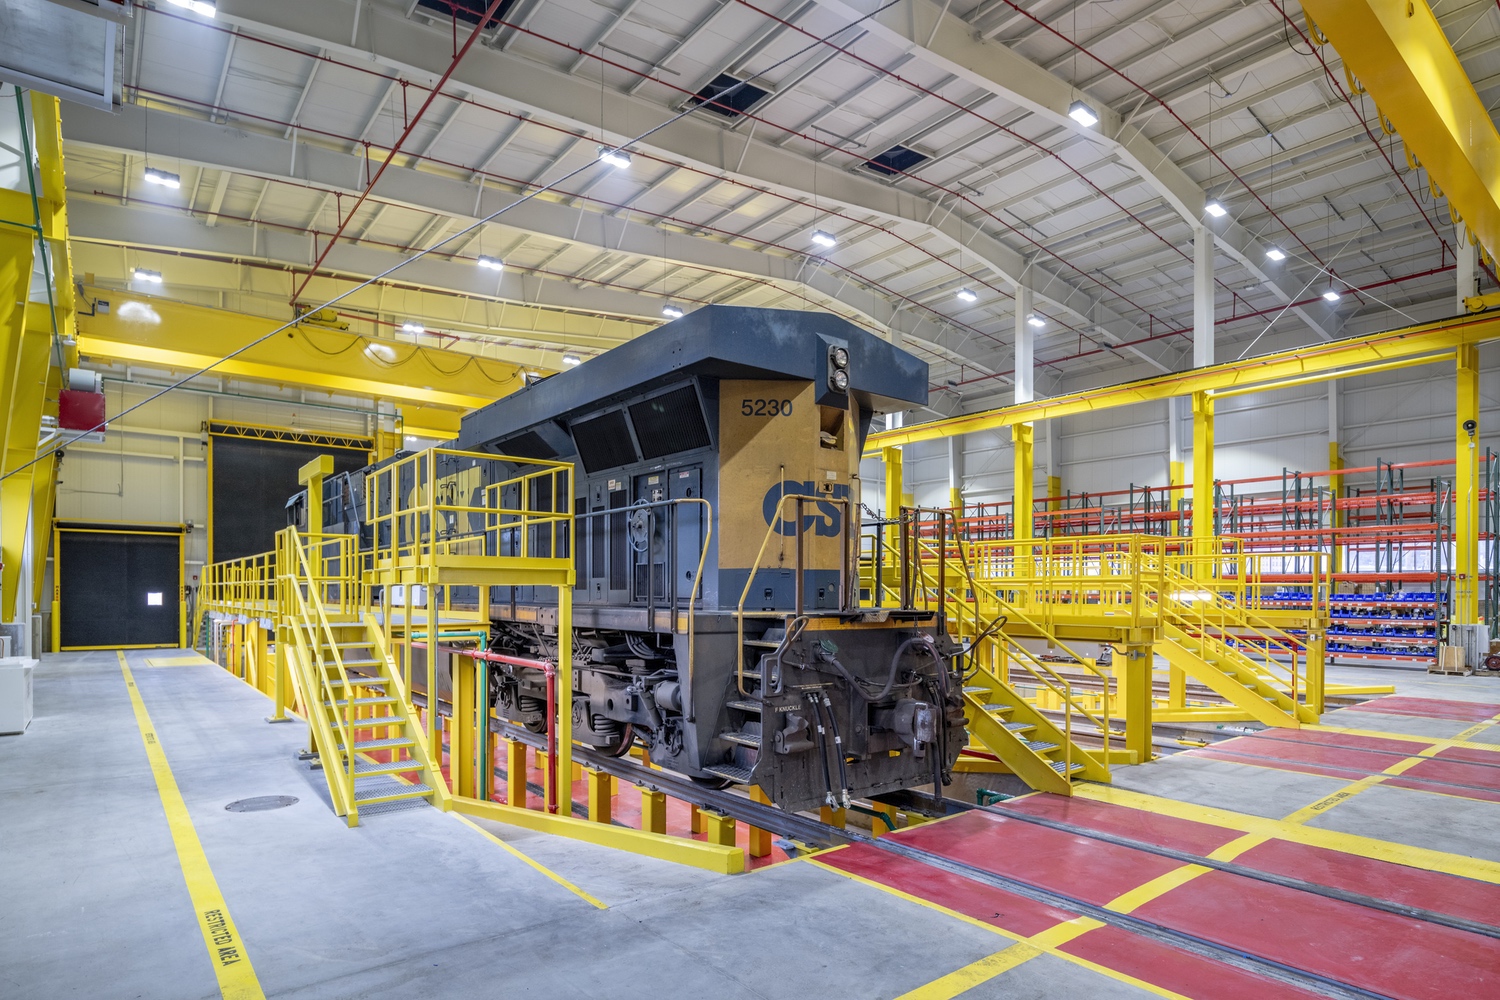 CSX Transportation’s Expansion of the Locomotive Service Center and